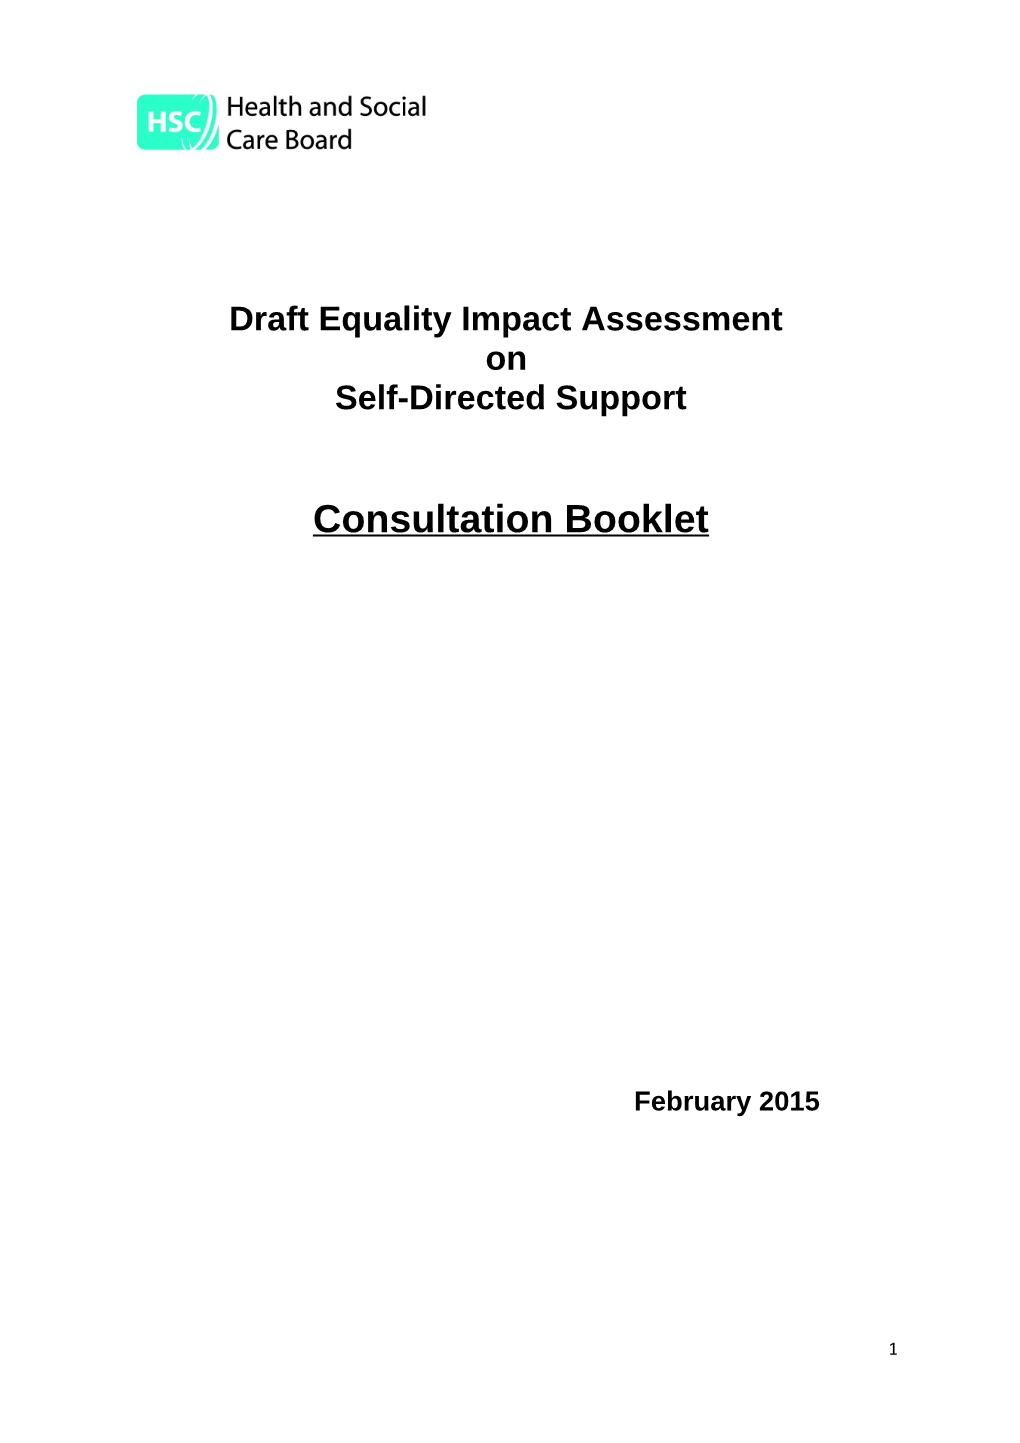 Draft Equality Impact Assessment